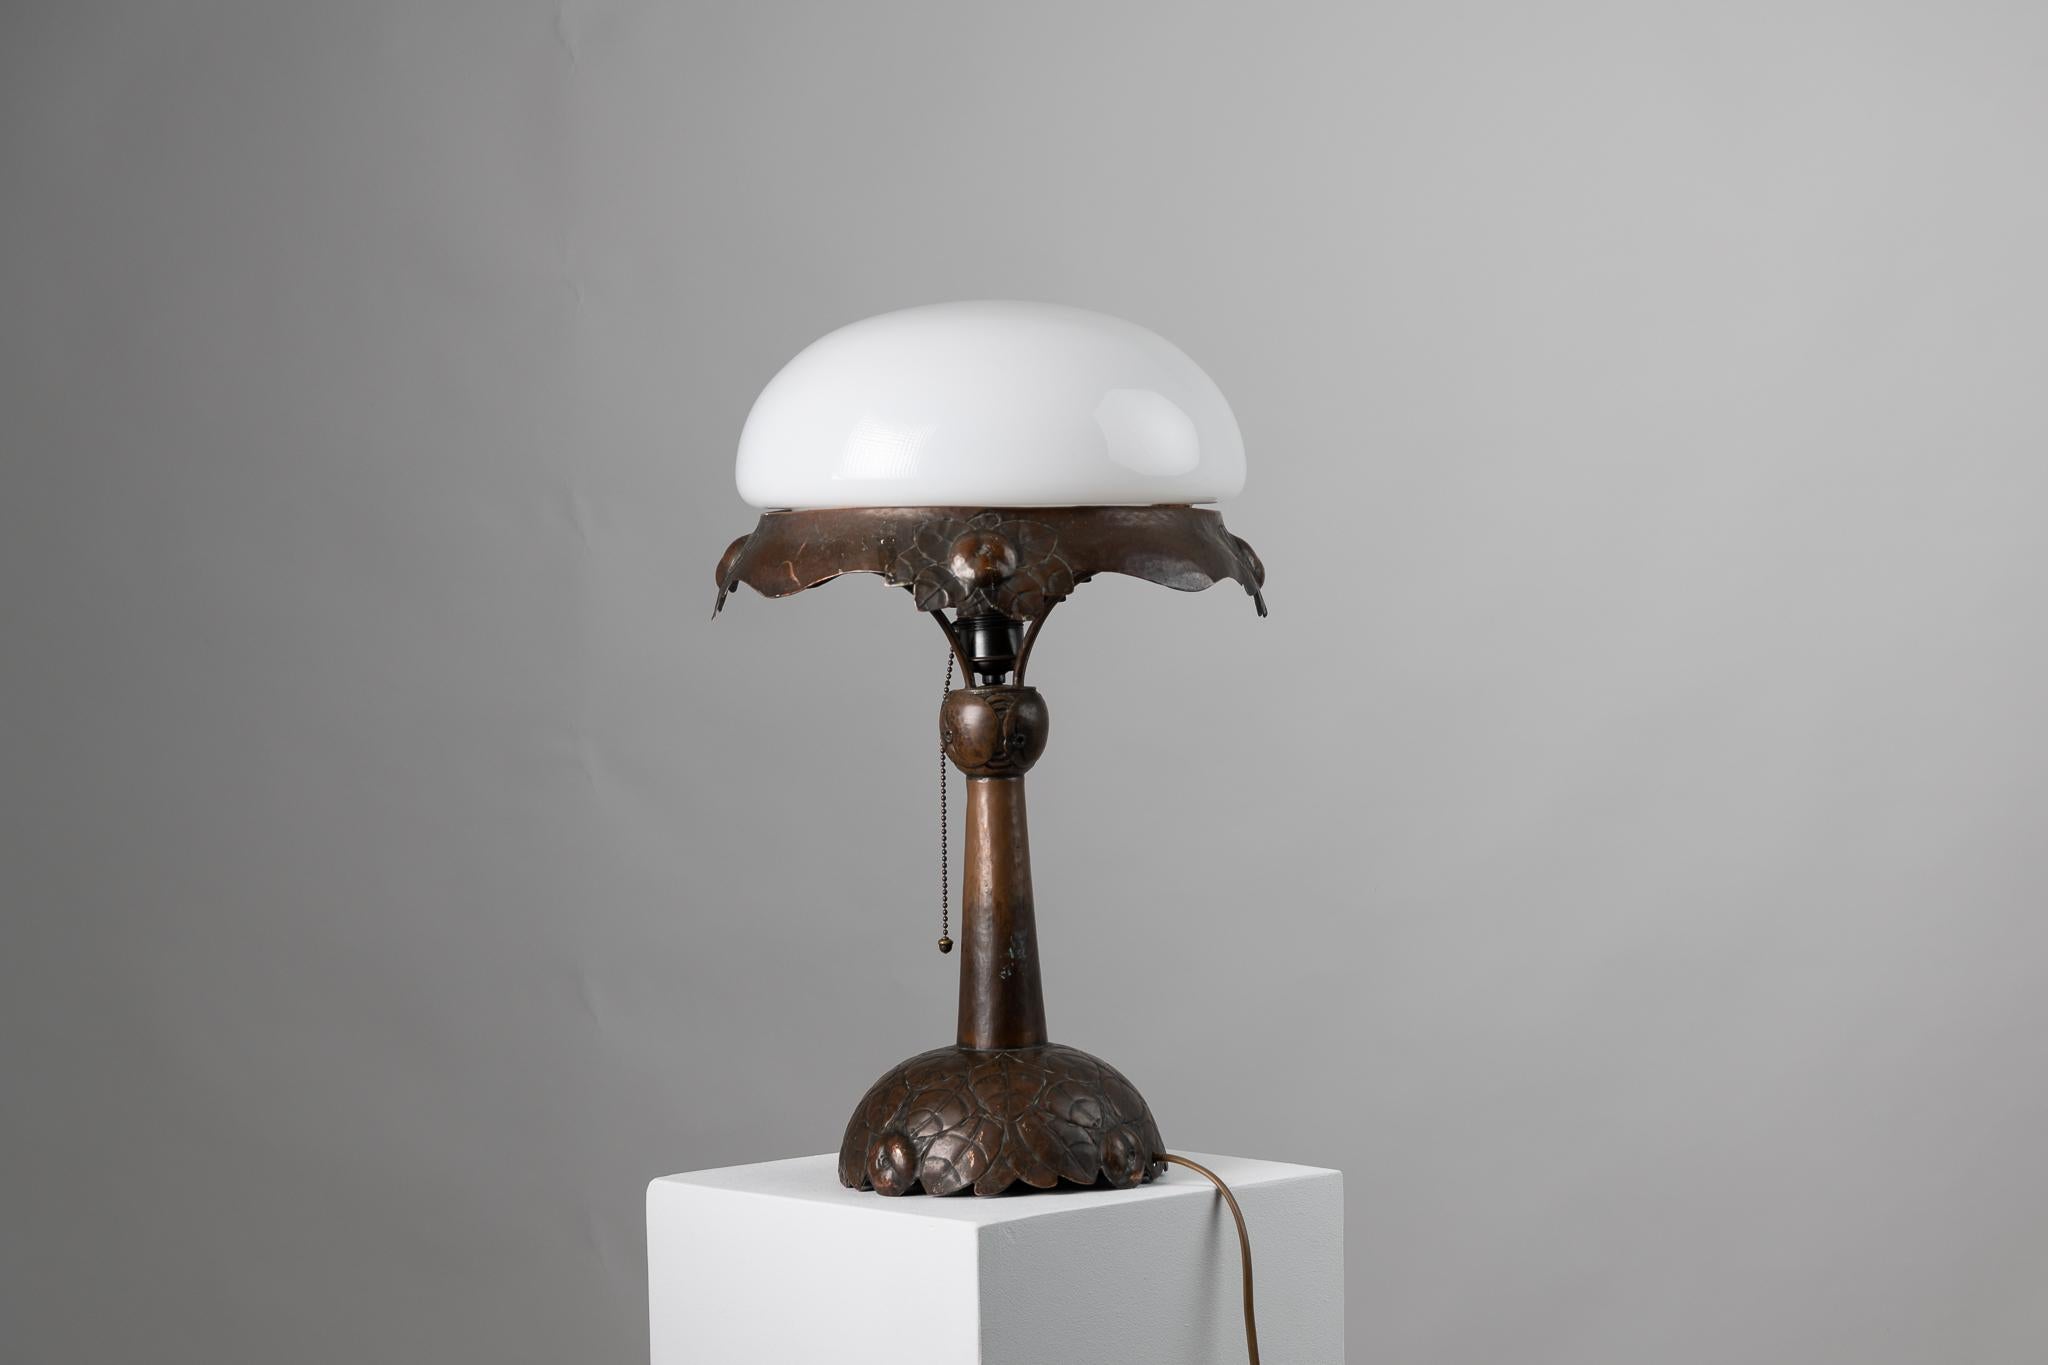 Art nouveau table lamp from Sweden. The lamp is from the early 20th century, from 1910 to 1915, and is hand made with a foot in solid copper. The whole lamp is decorated with typical art nouveau decor and reflects inspiration from nature with an